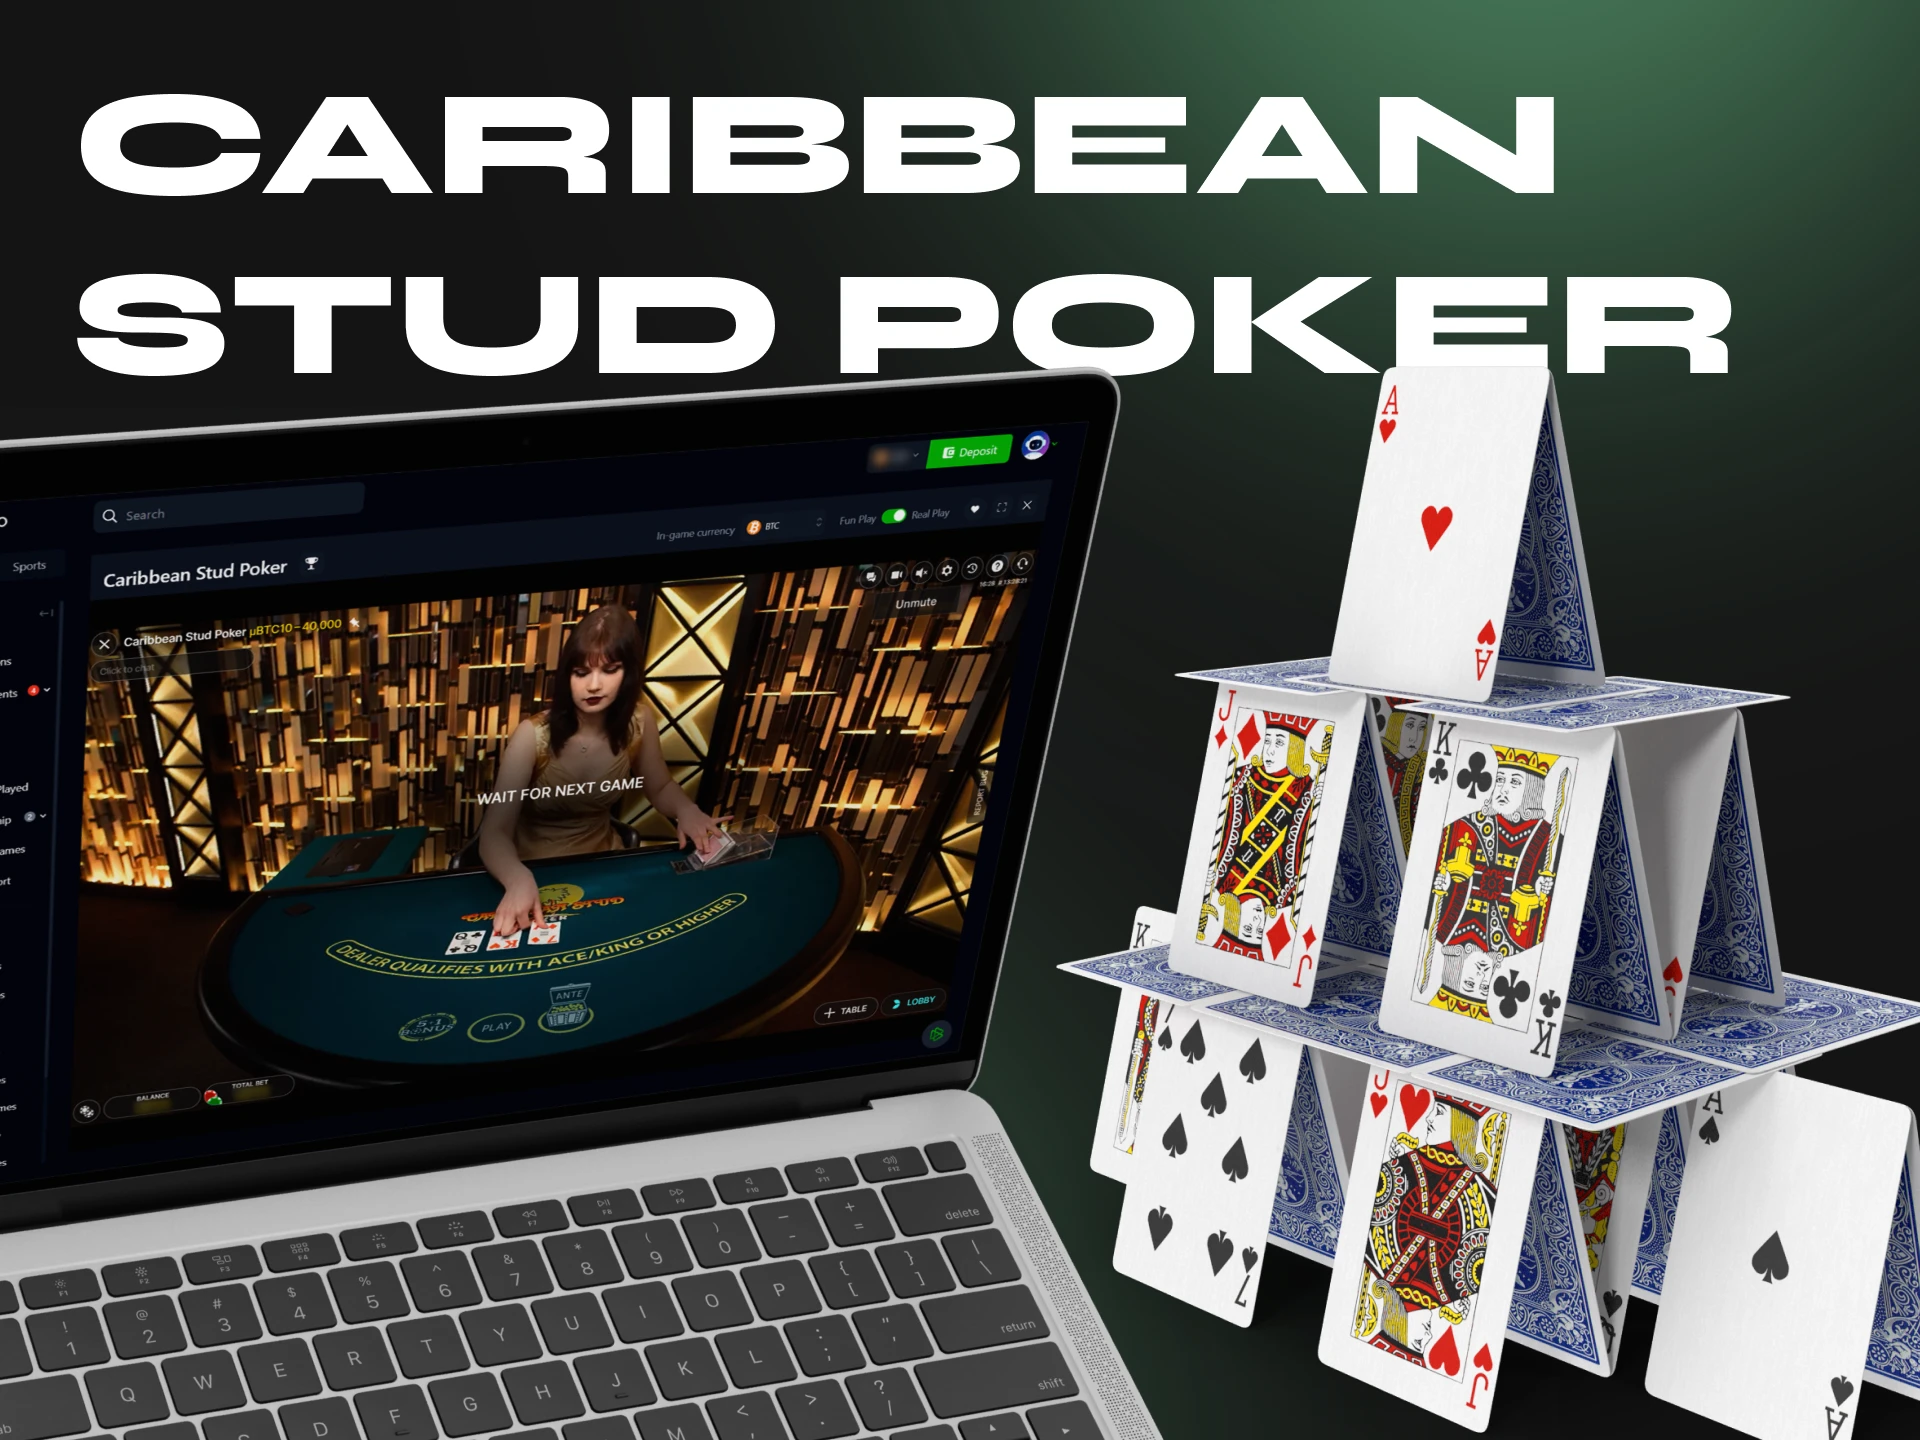 Try playing Caribbean Stid Poker in a crypto casino for cryptocurrency.